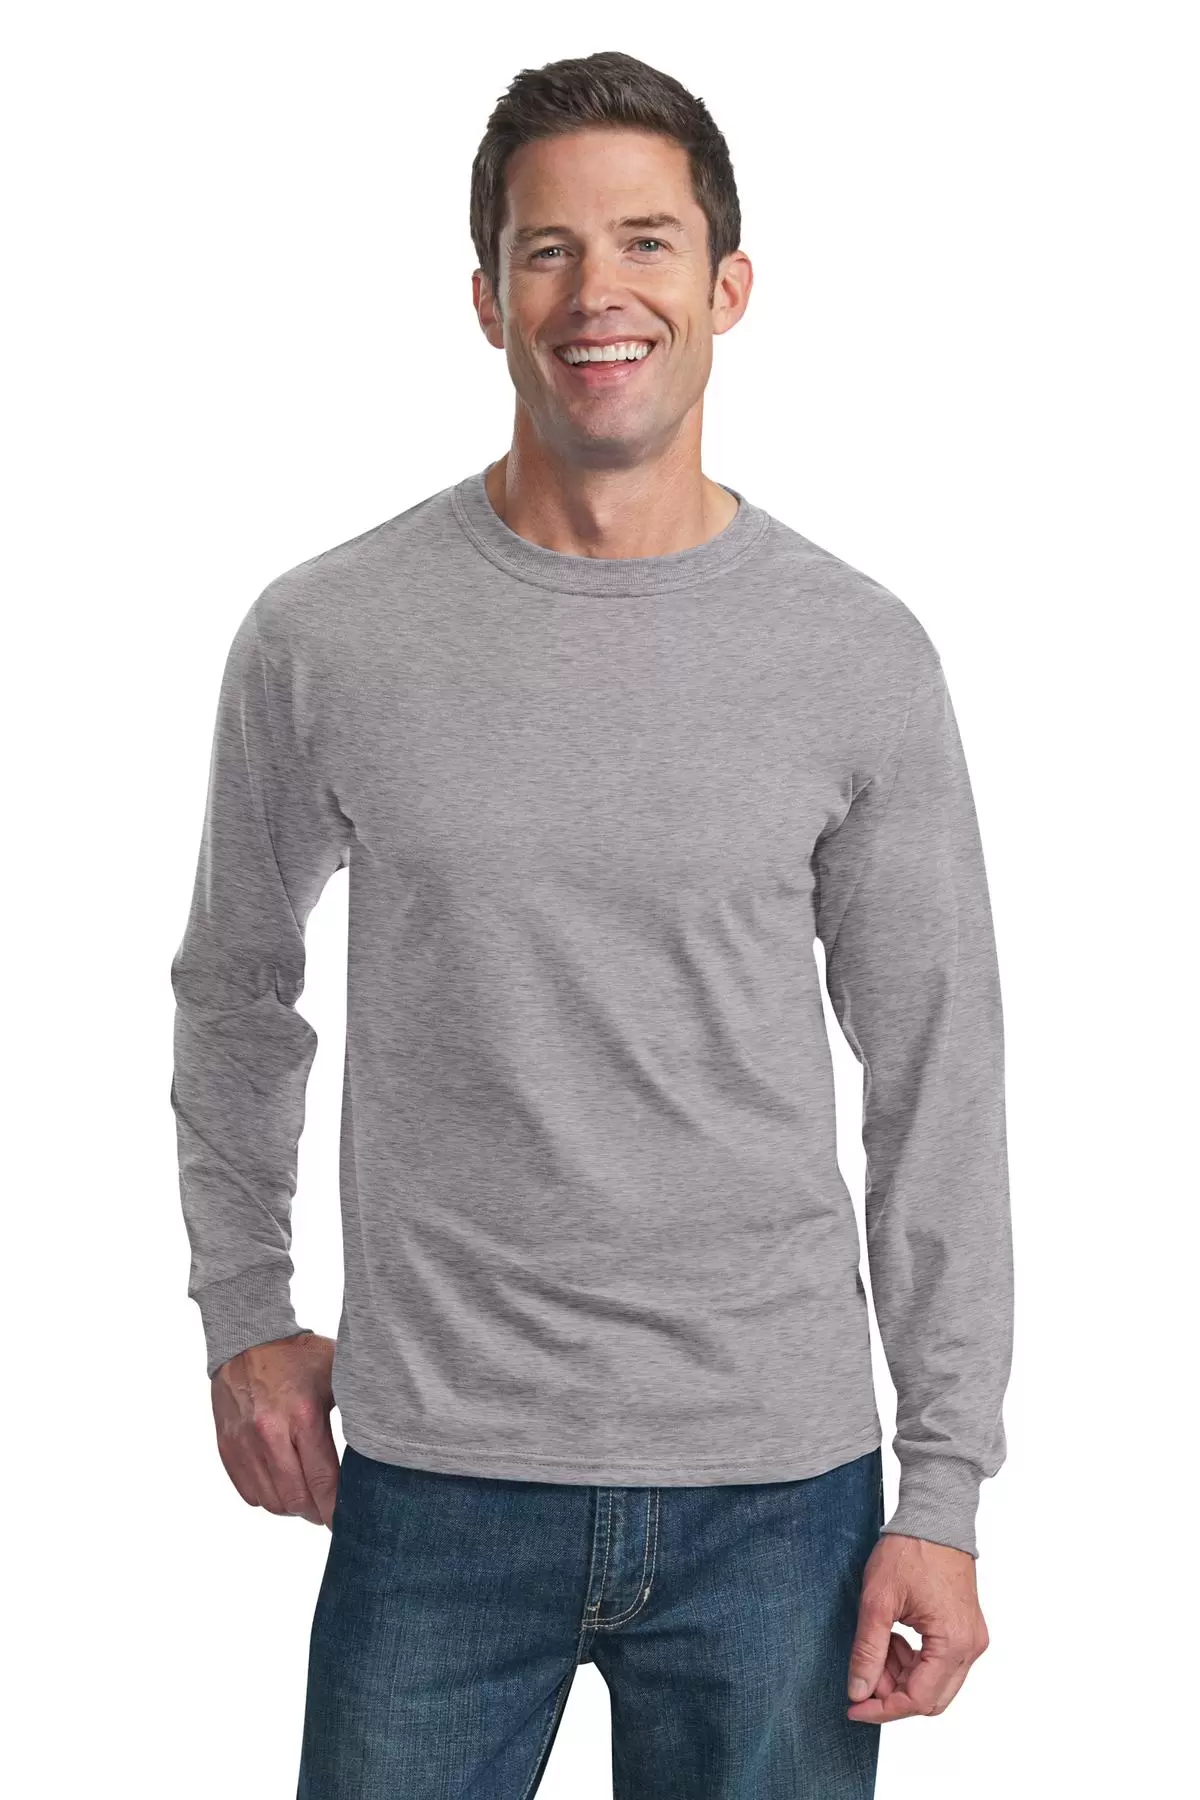 Fruit of The Loom HD Cotton Long Sleeve T-Shirt - Kelly - S